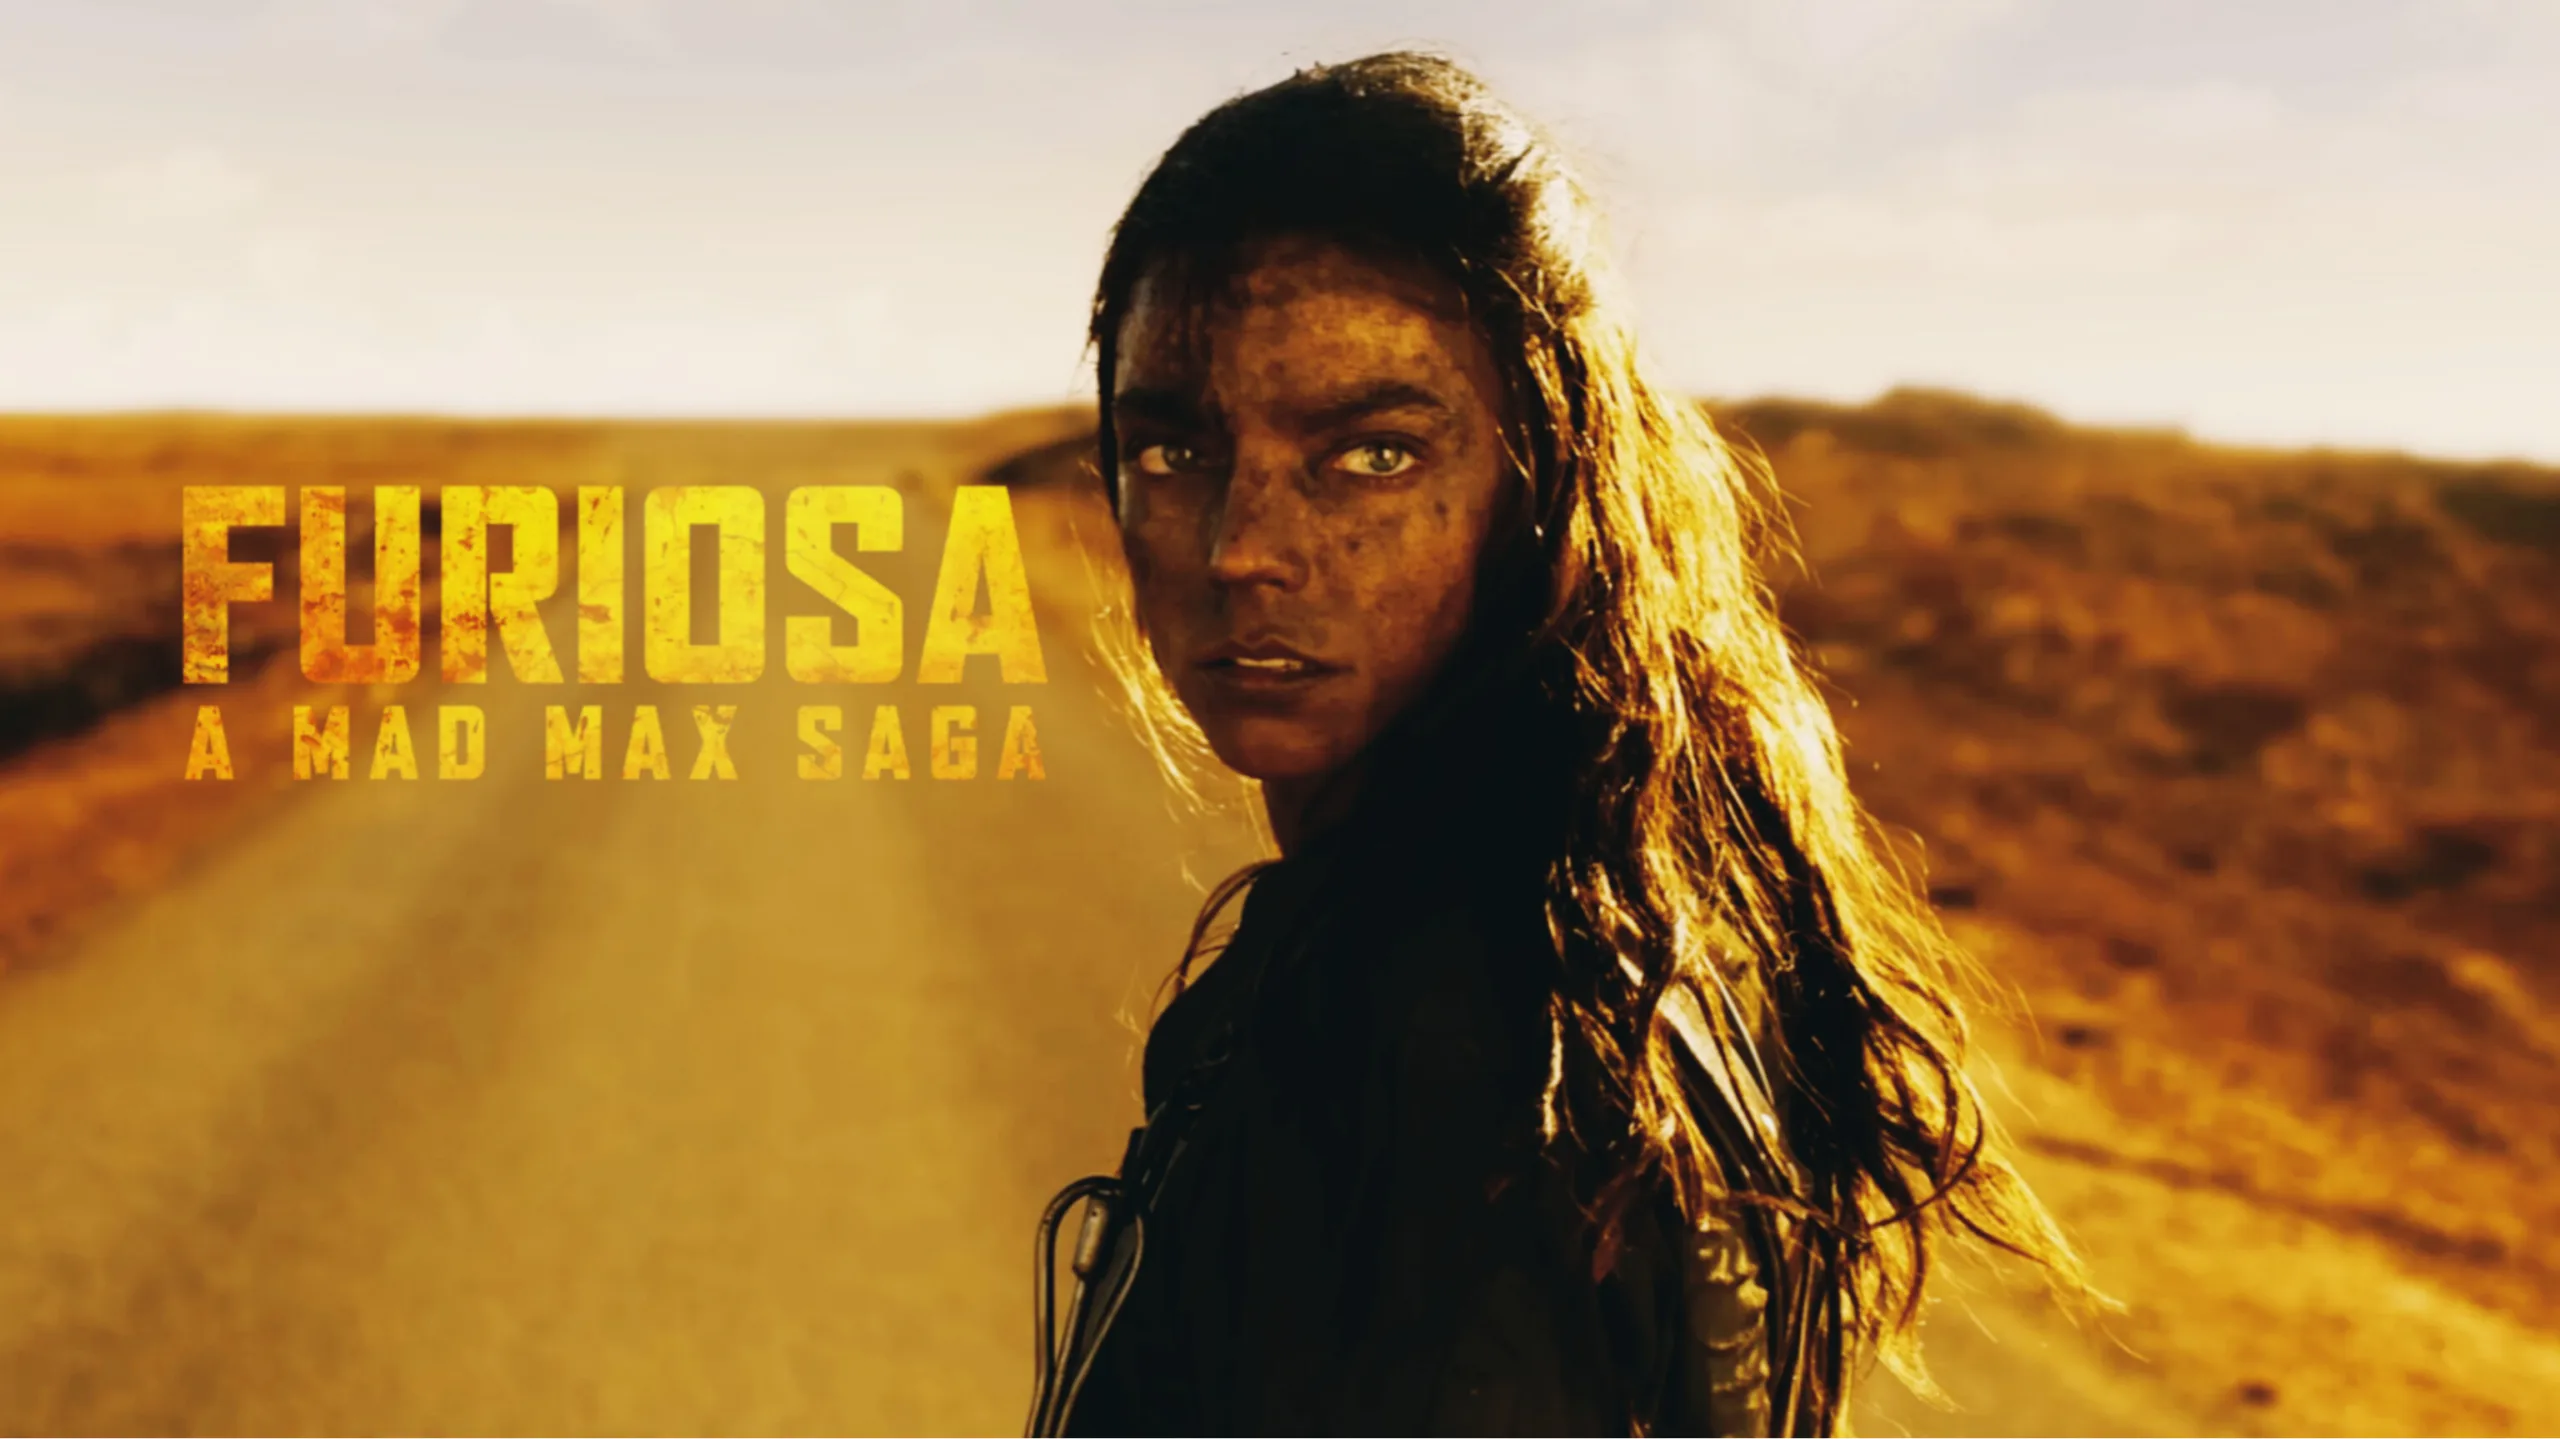 Furiosa: A Mad Max Saga – The Epic Prequel We've Been Waiting For!